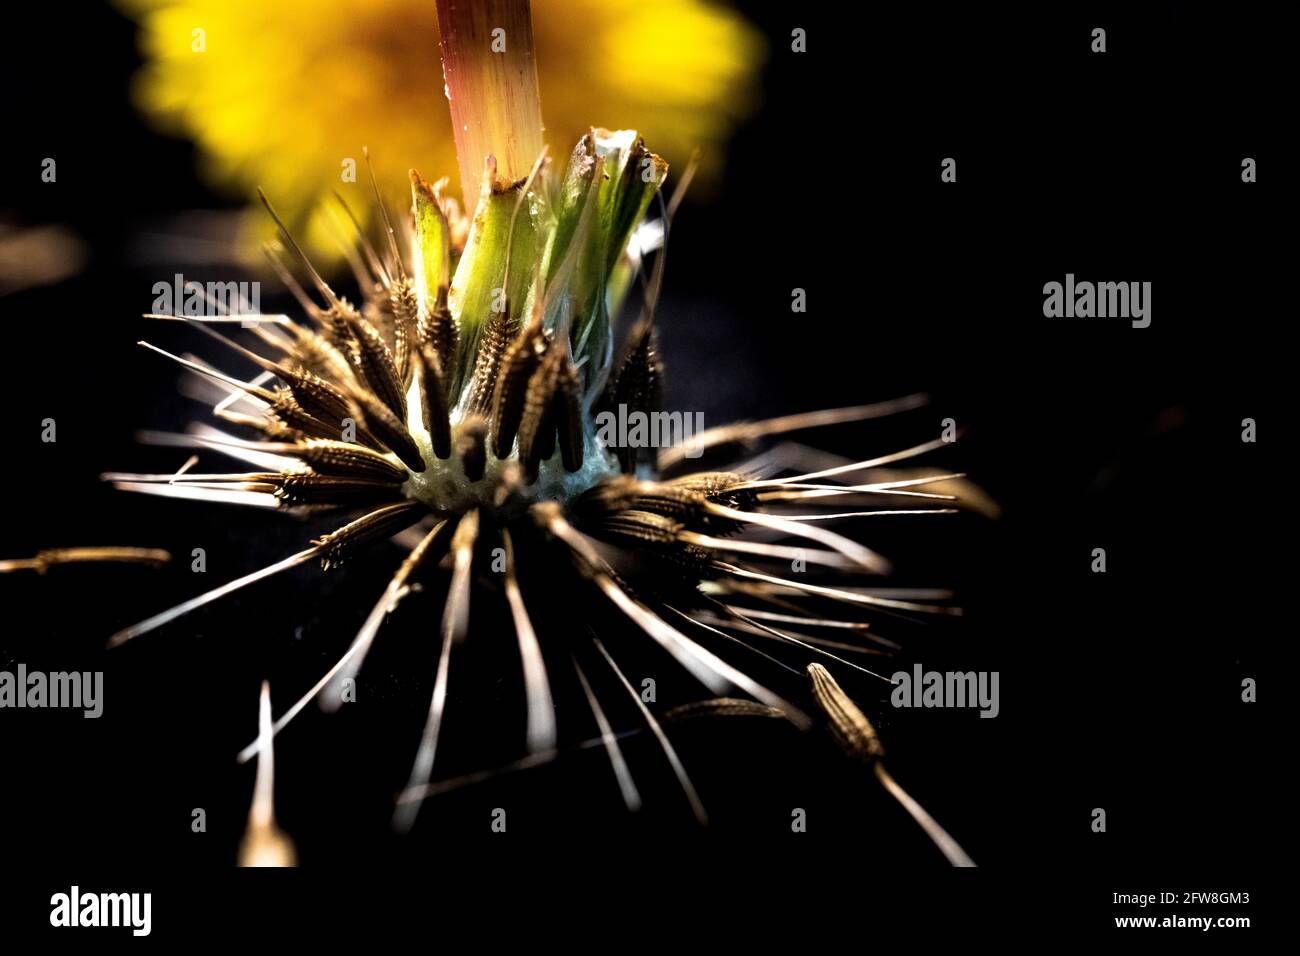 Upside Down Dandelion Seed Head Isolated on Black Background in Front of Yellow Dandelion Flower Head Stock Photo